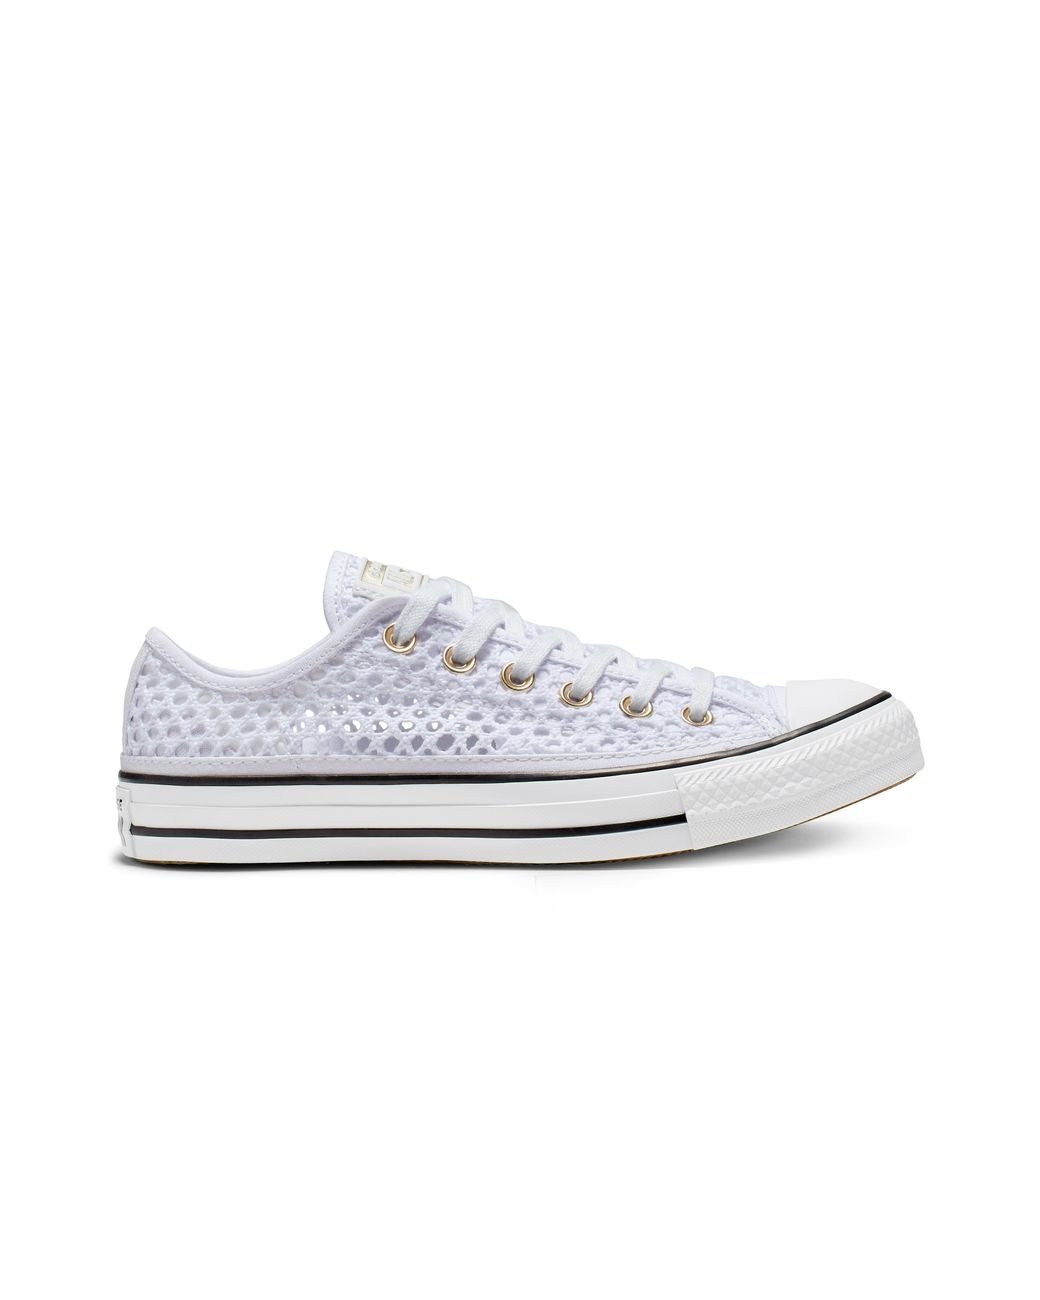 Converse Chuck Taylor All Star Crochet Low Top in White | Lyst